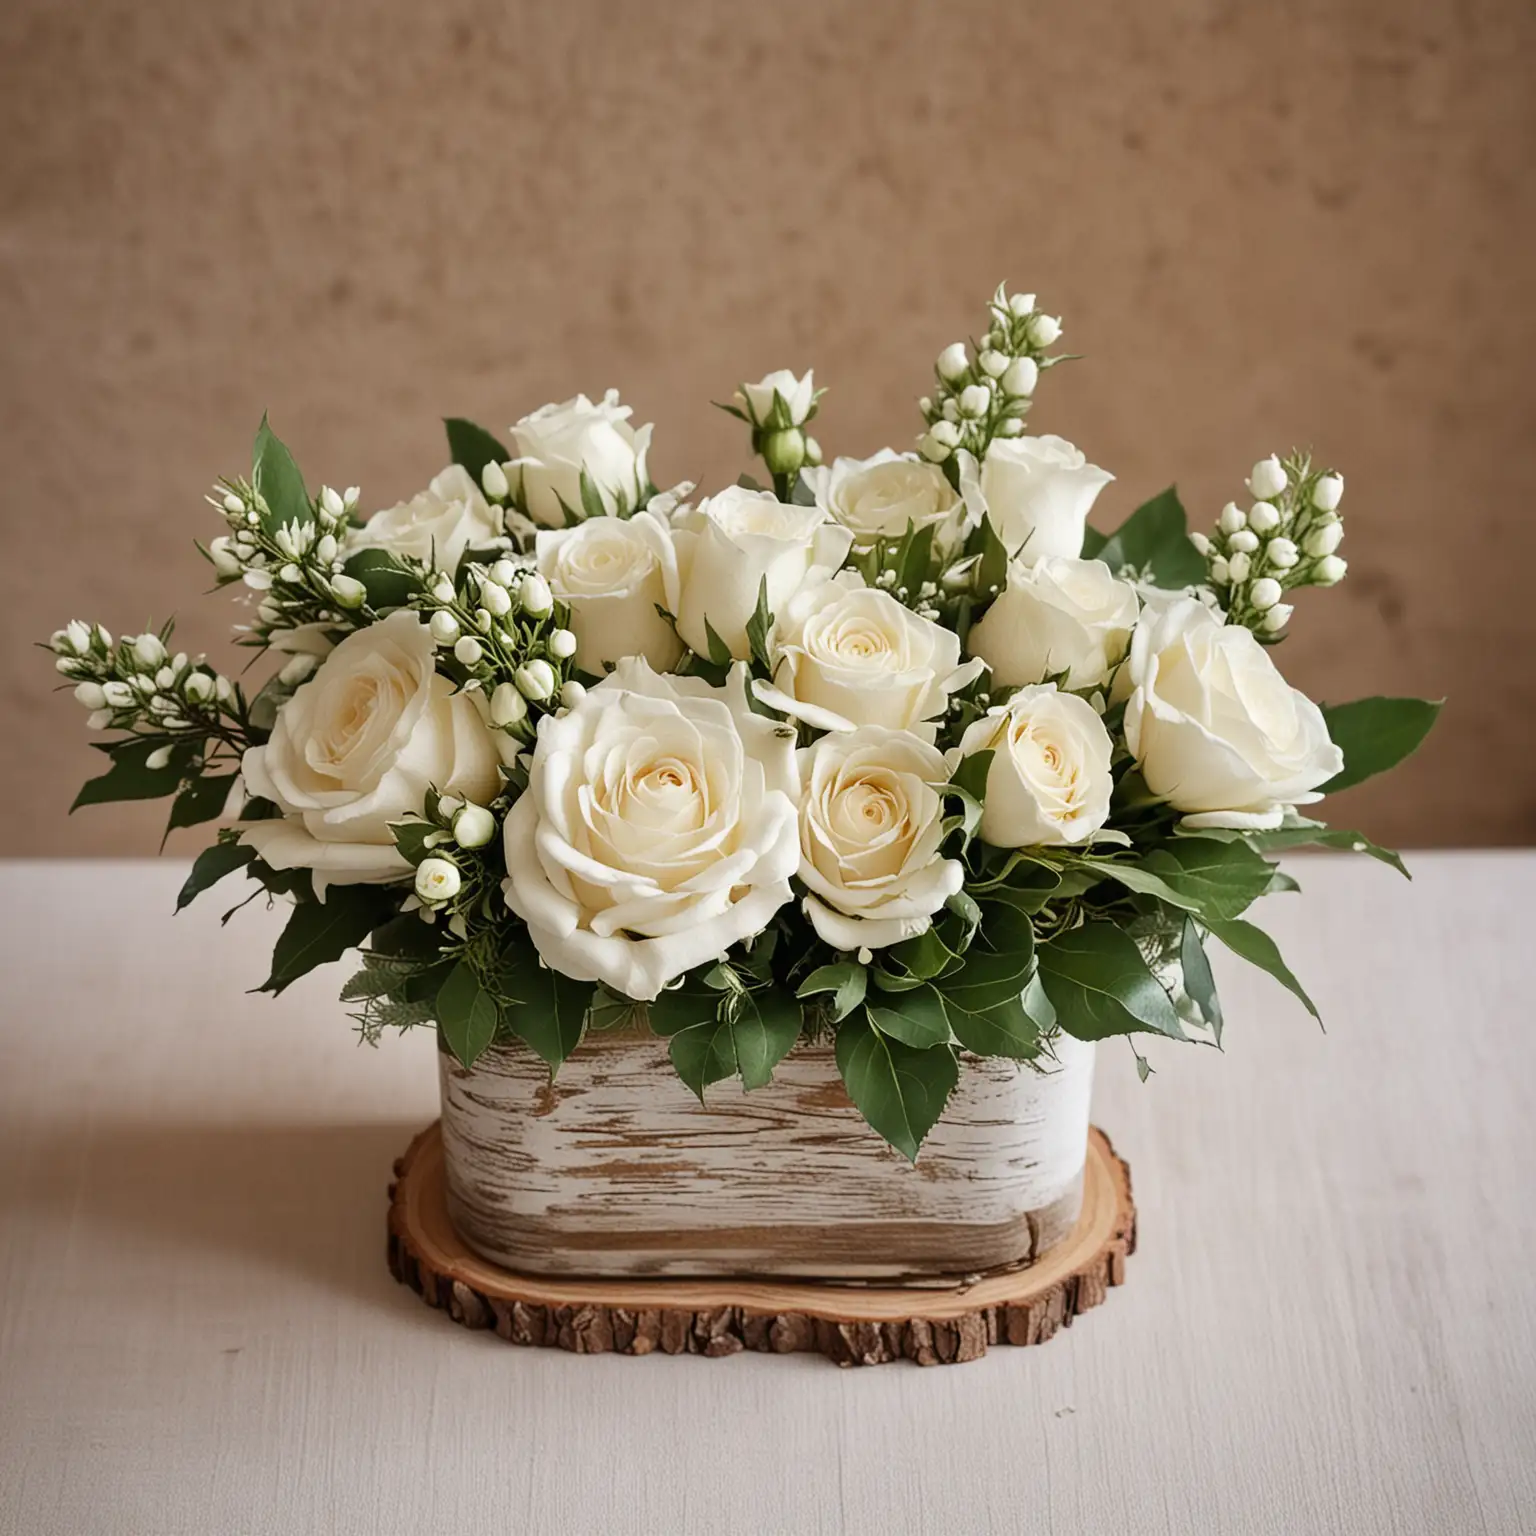 Rustic-White-Winter-Wedding-Centerpiece-with-Blossoms-and-White-Roses